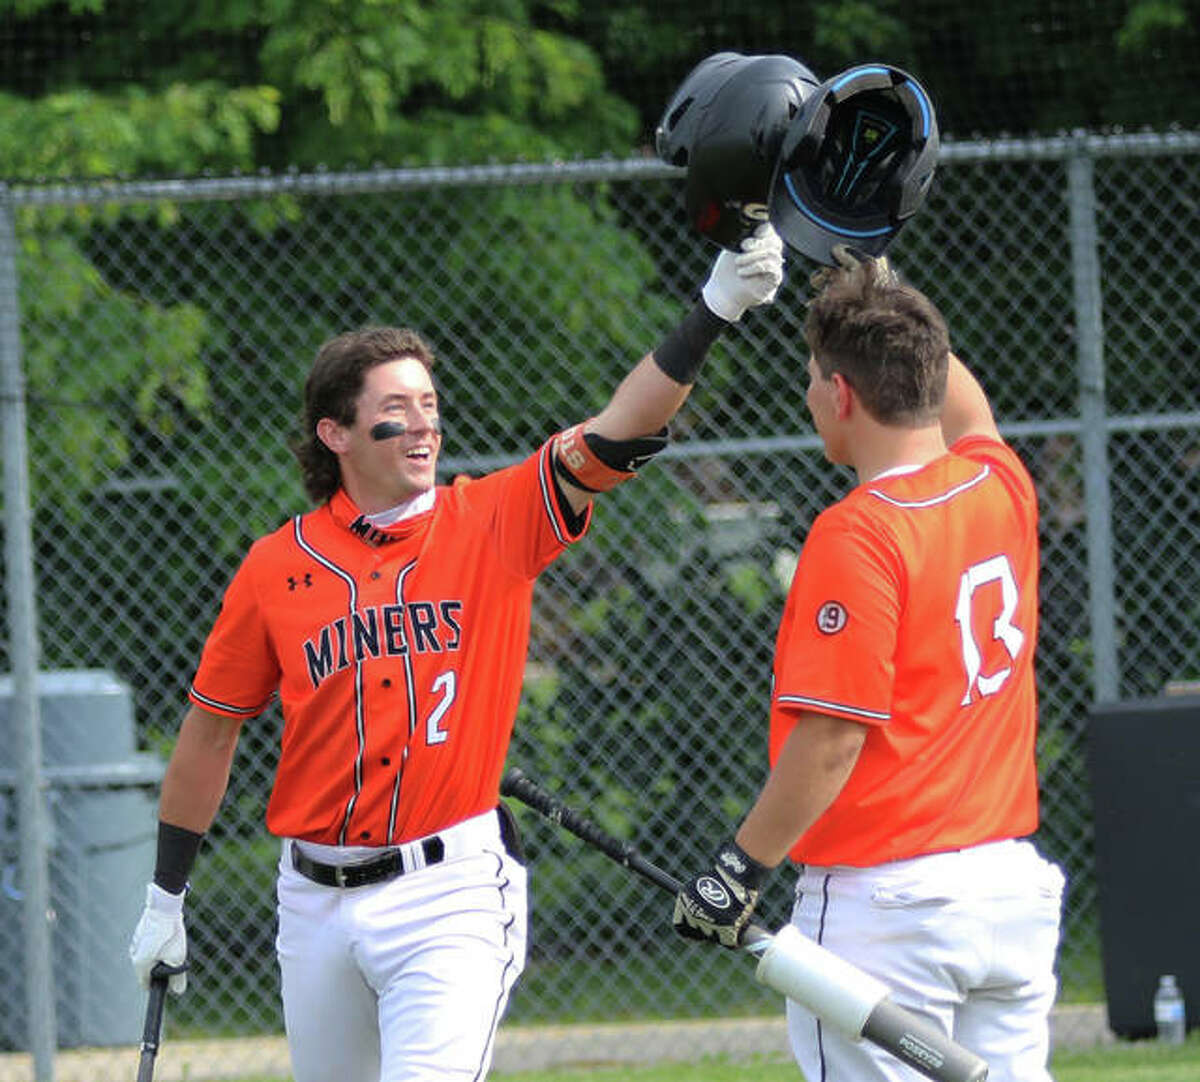 Gillespie’s Cameron Hailstone (left) gets a congratulatory helmet tap from teammate Gavin Griffith after Hailstone’s first of two home runs in the Miners’ win over Southwestern on Monday in Gillespie.